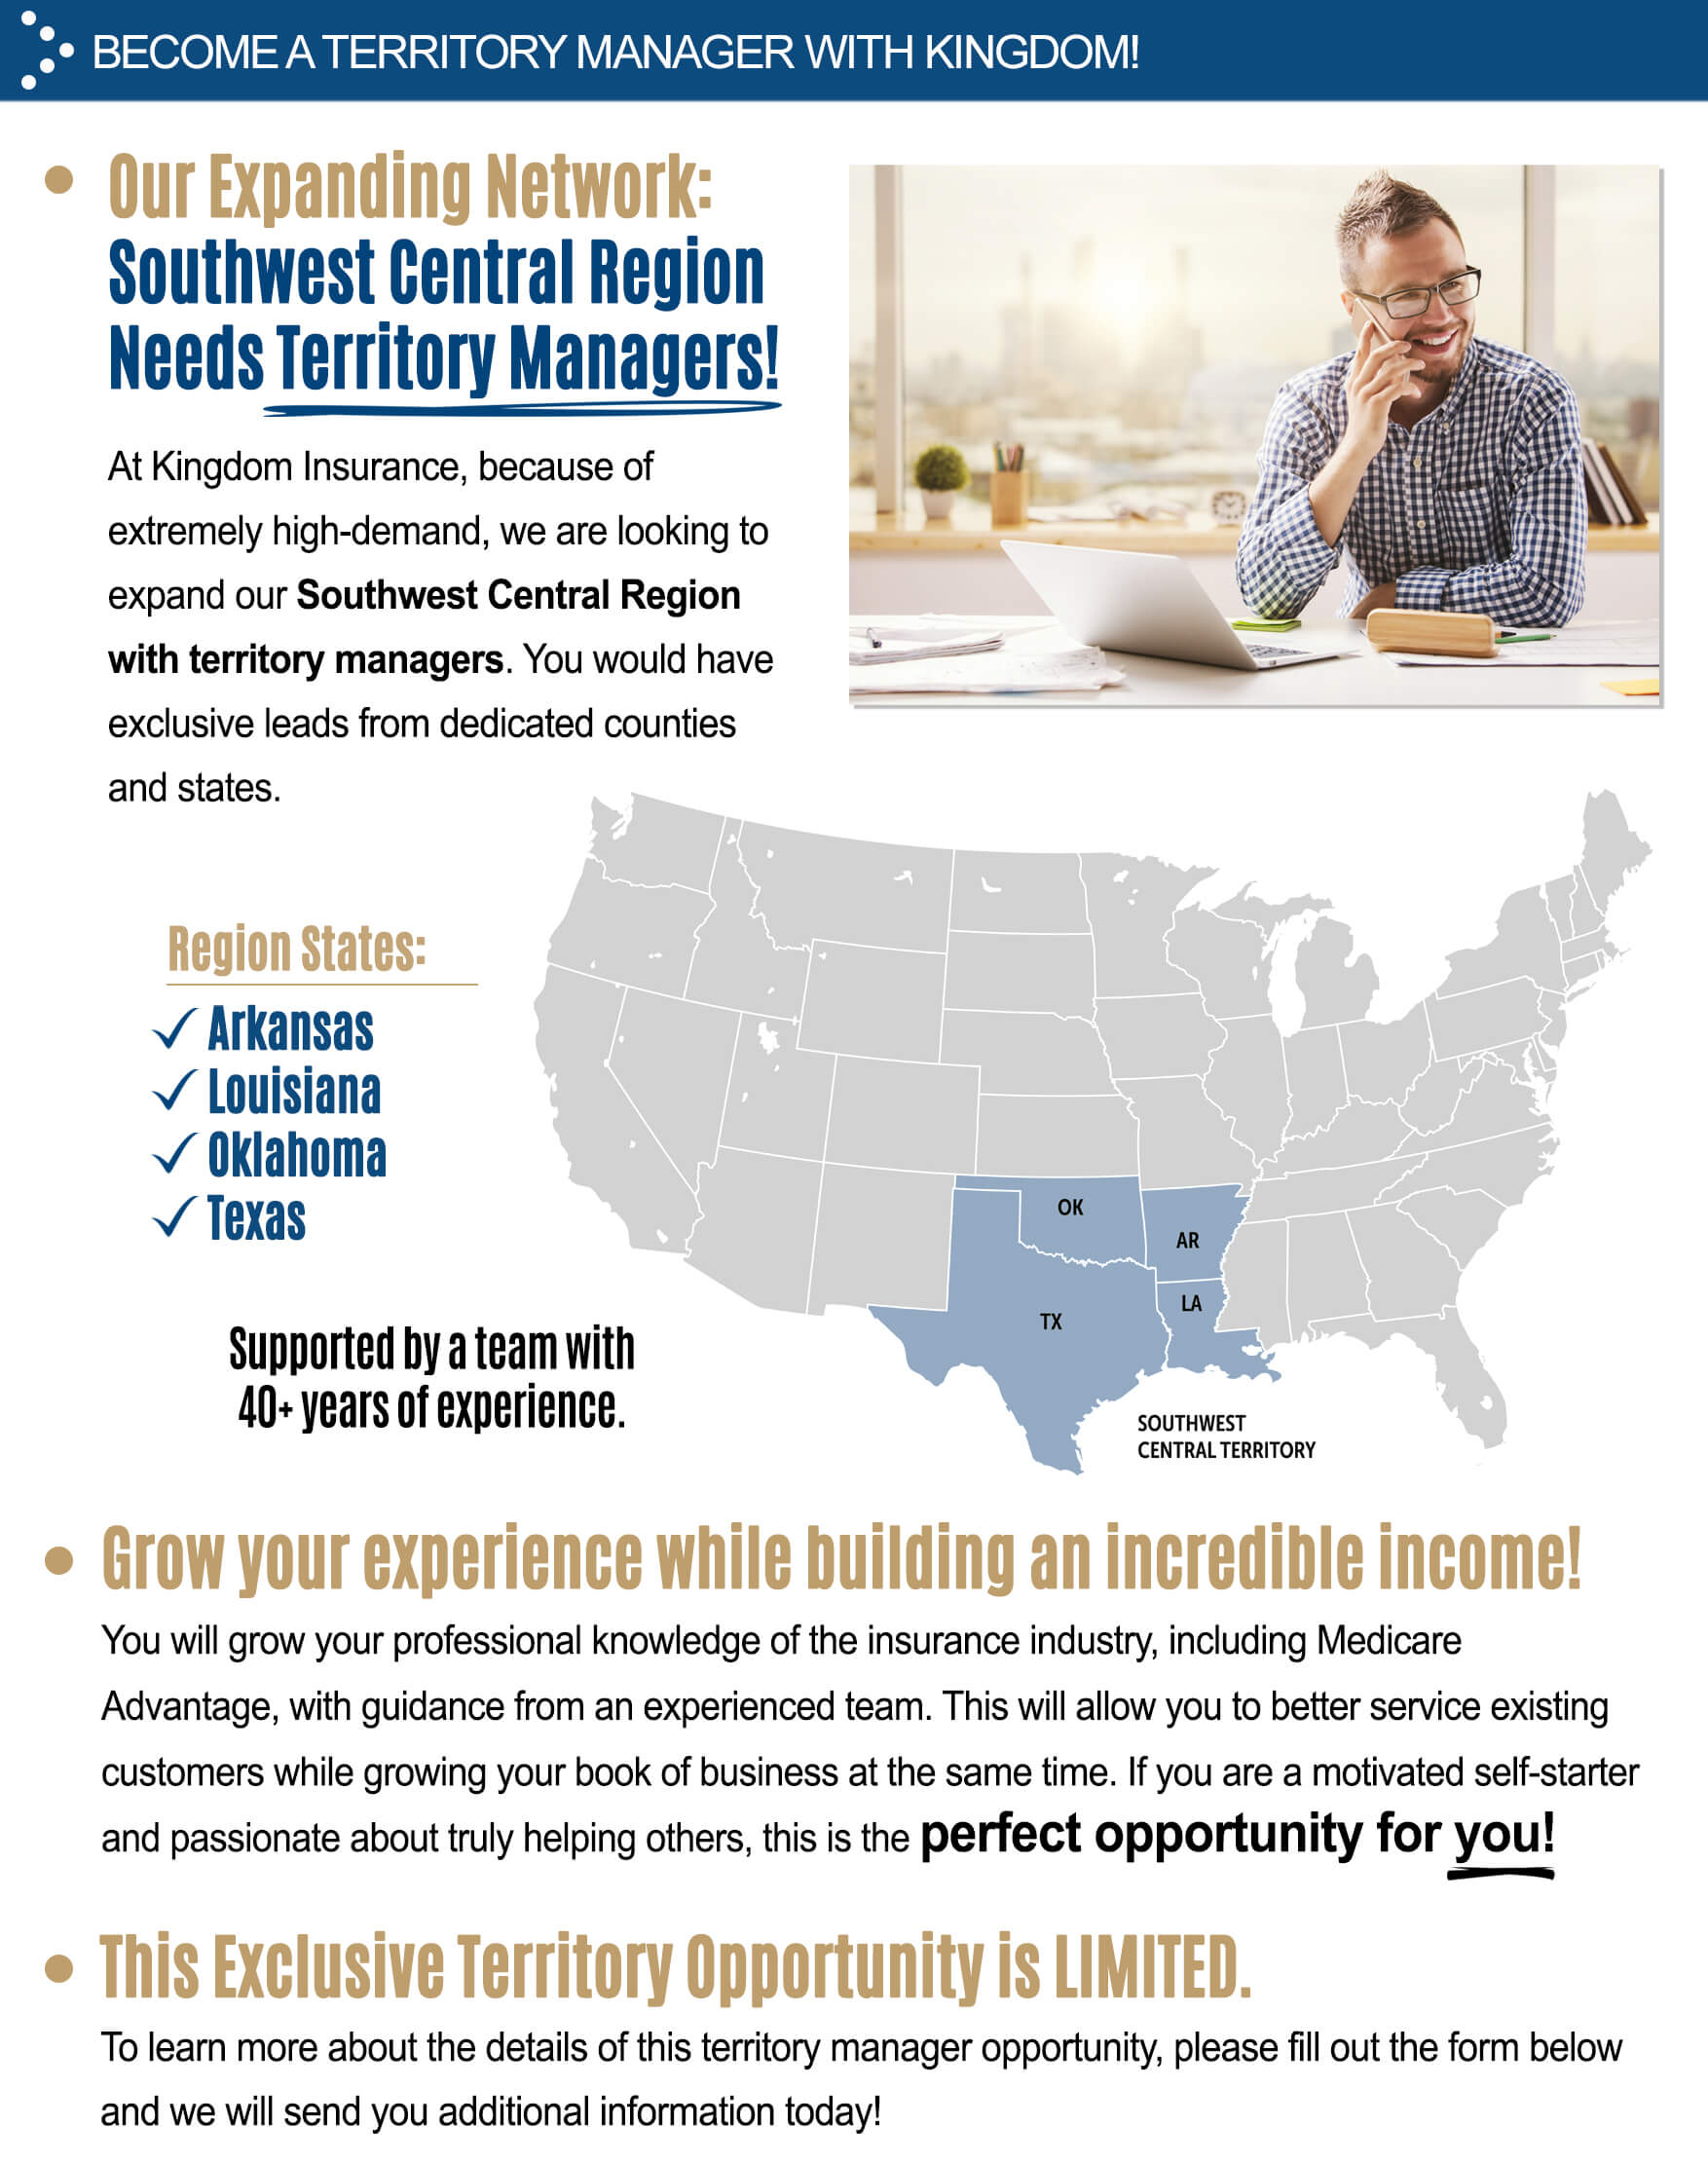 South Region 1 needs territory managers!